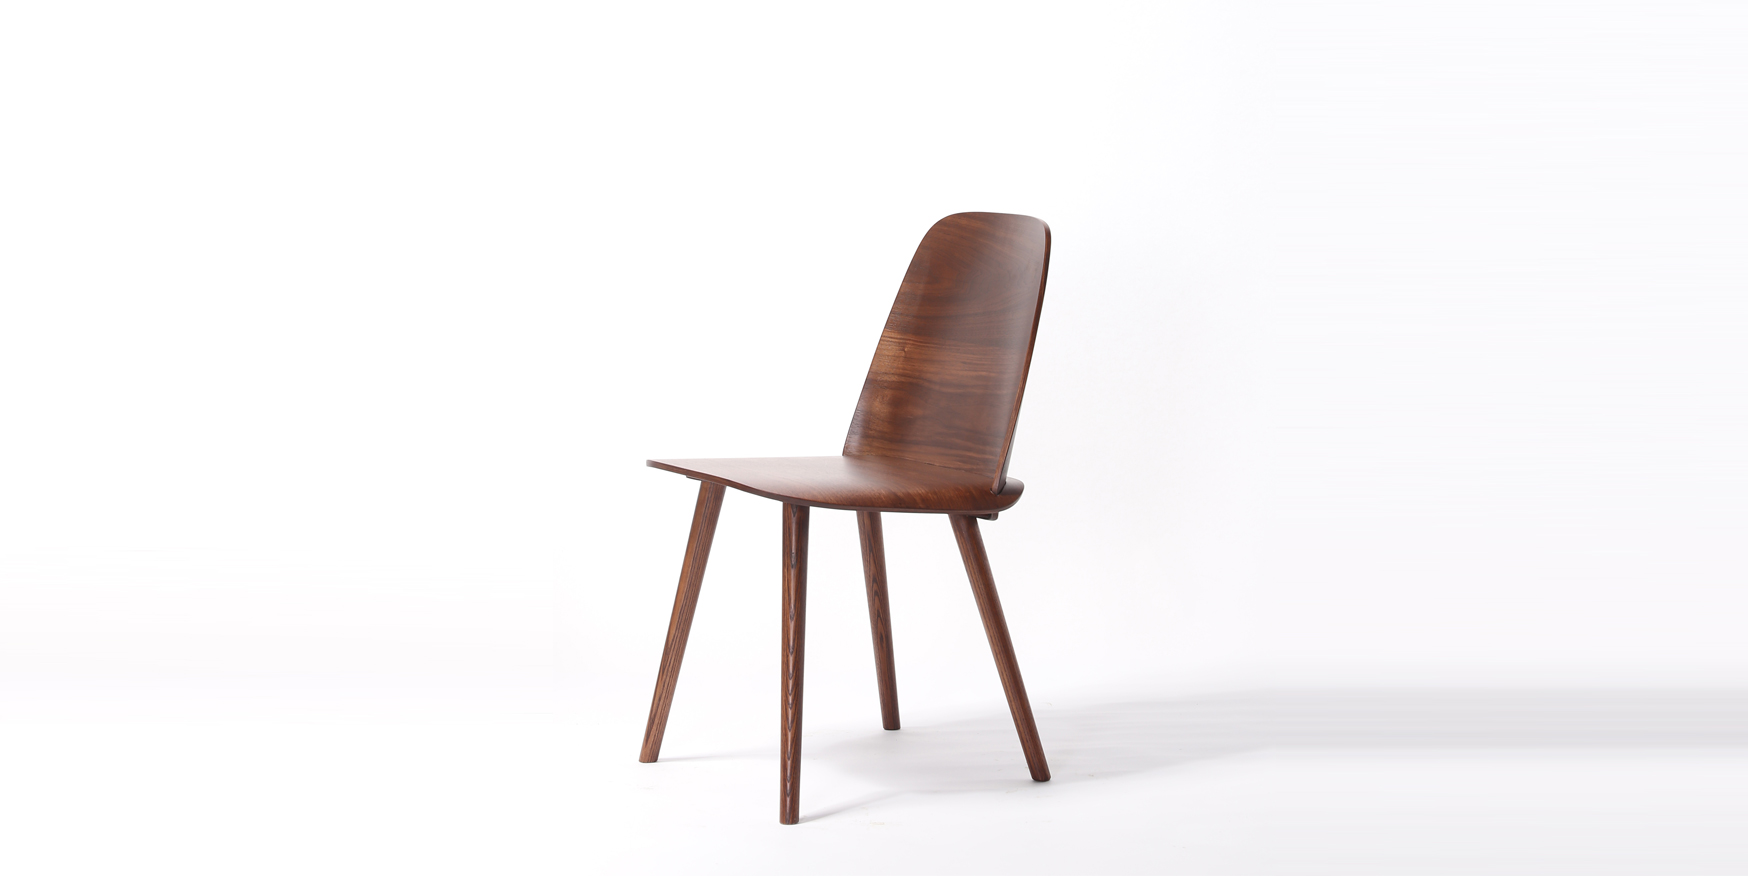 ply dining chair
